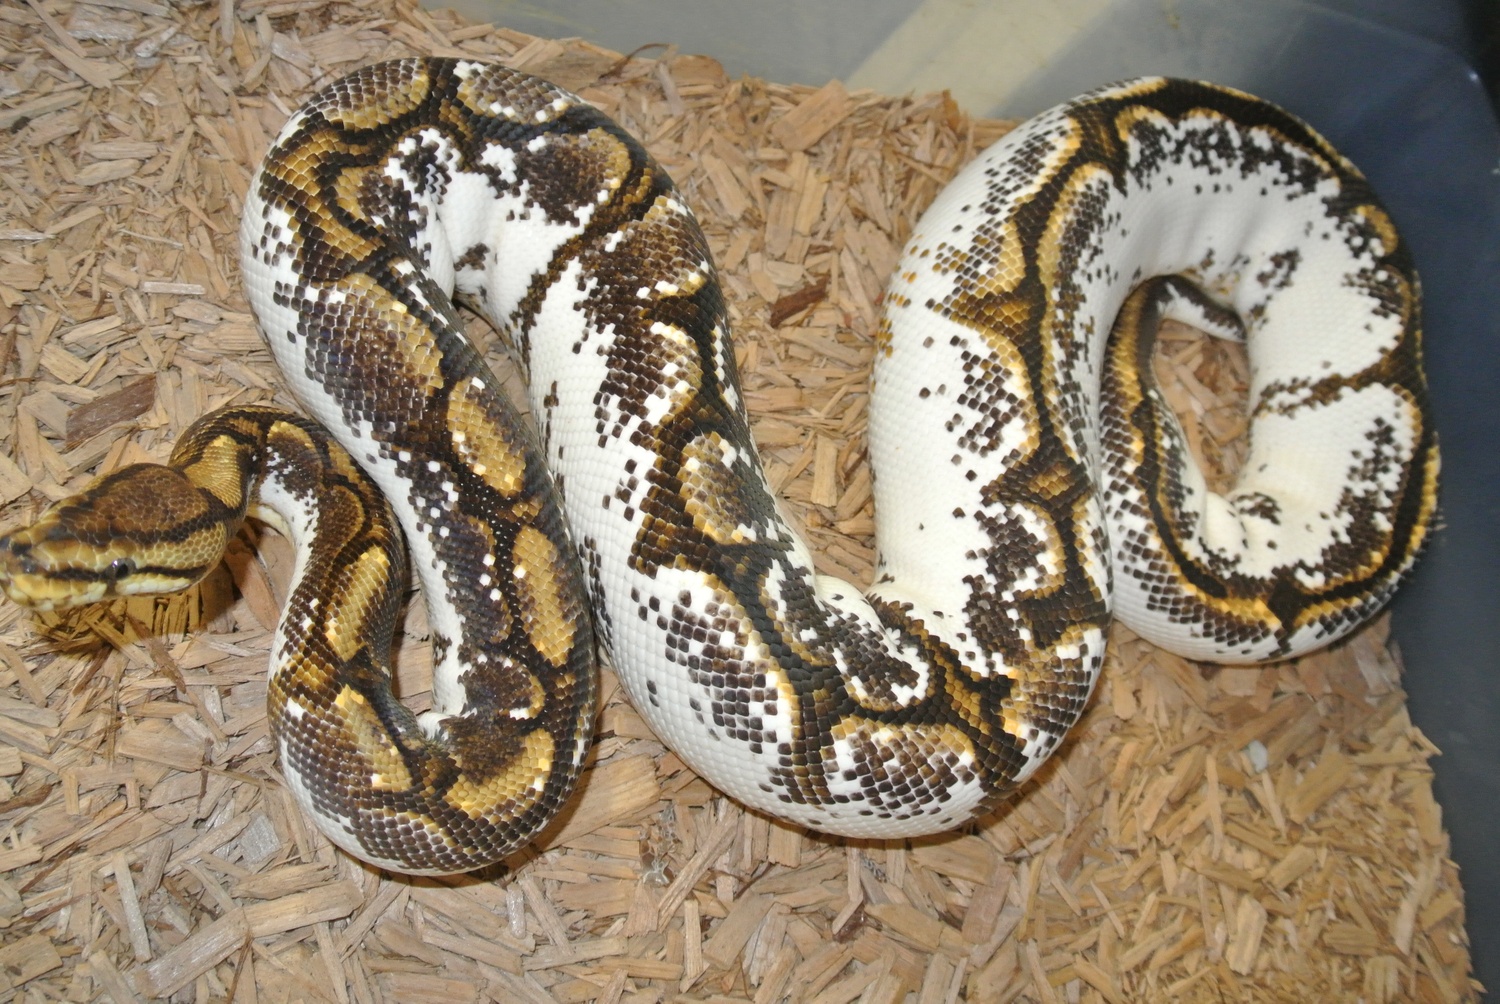 Calico Spider Yellow Belly Ball Python by Lair of Dragons